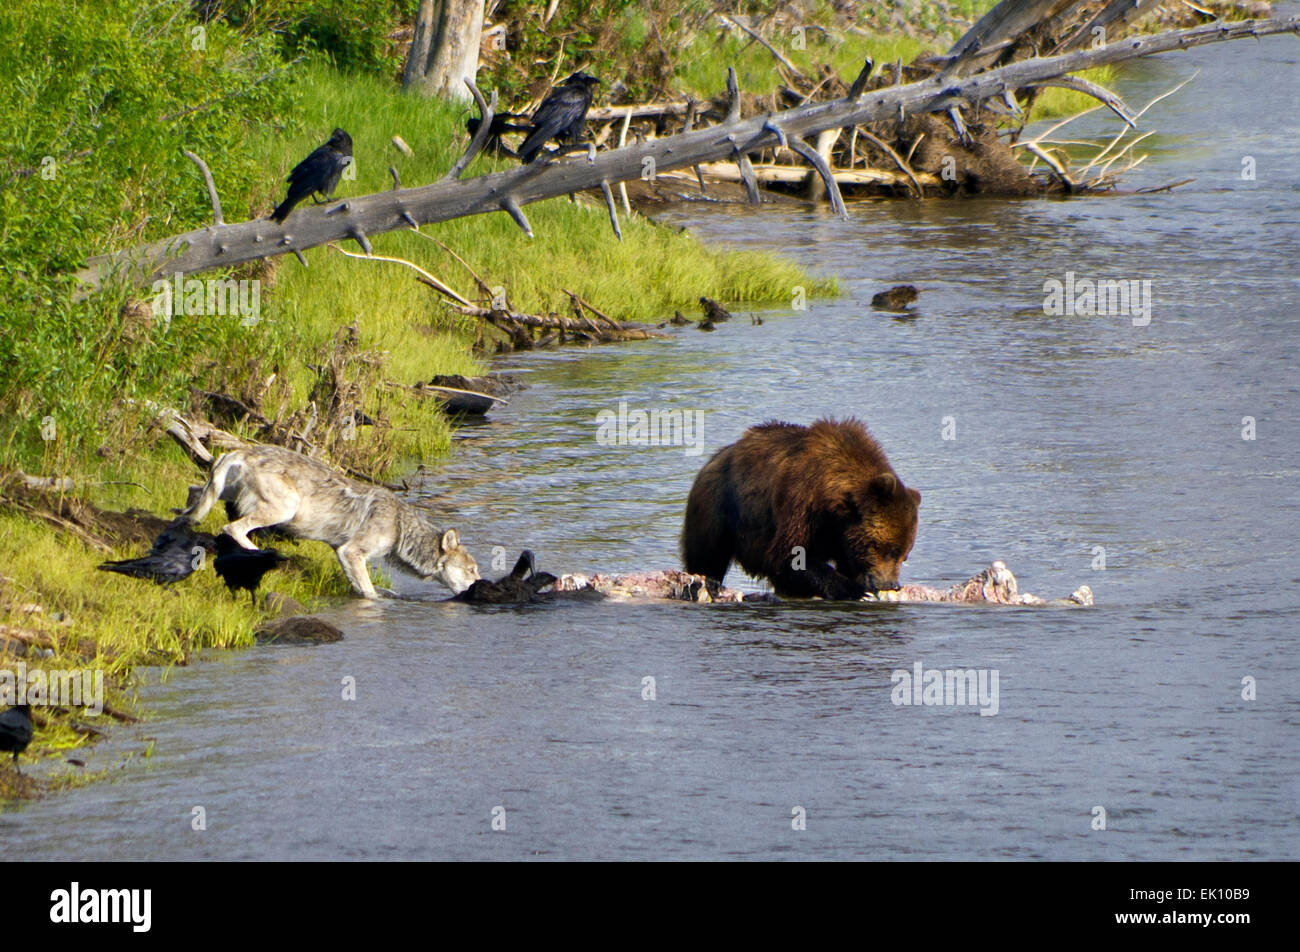 A wolf and grizzly bear feed on the carcass of a dead bison in the Lamar River, in the Lamar Valley of Yellowstone National Park Stock Photo